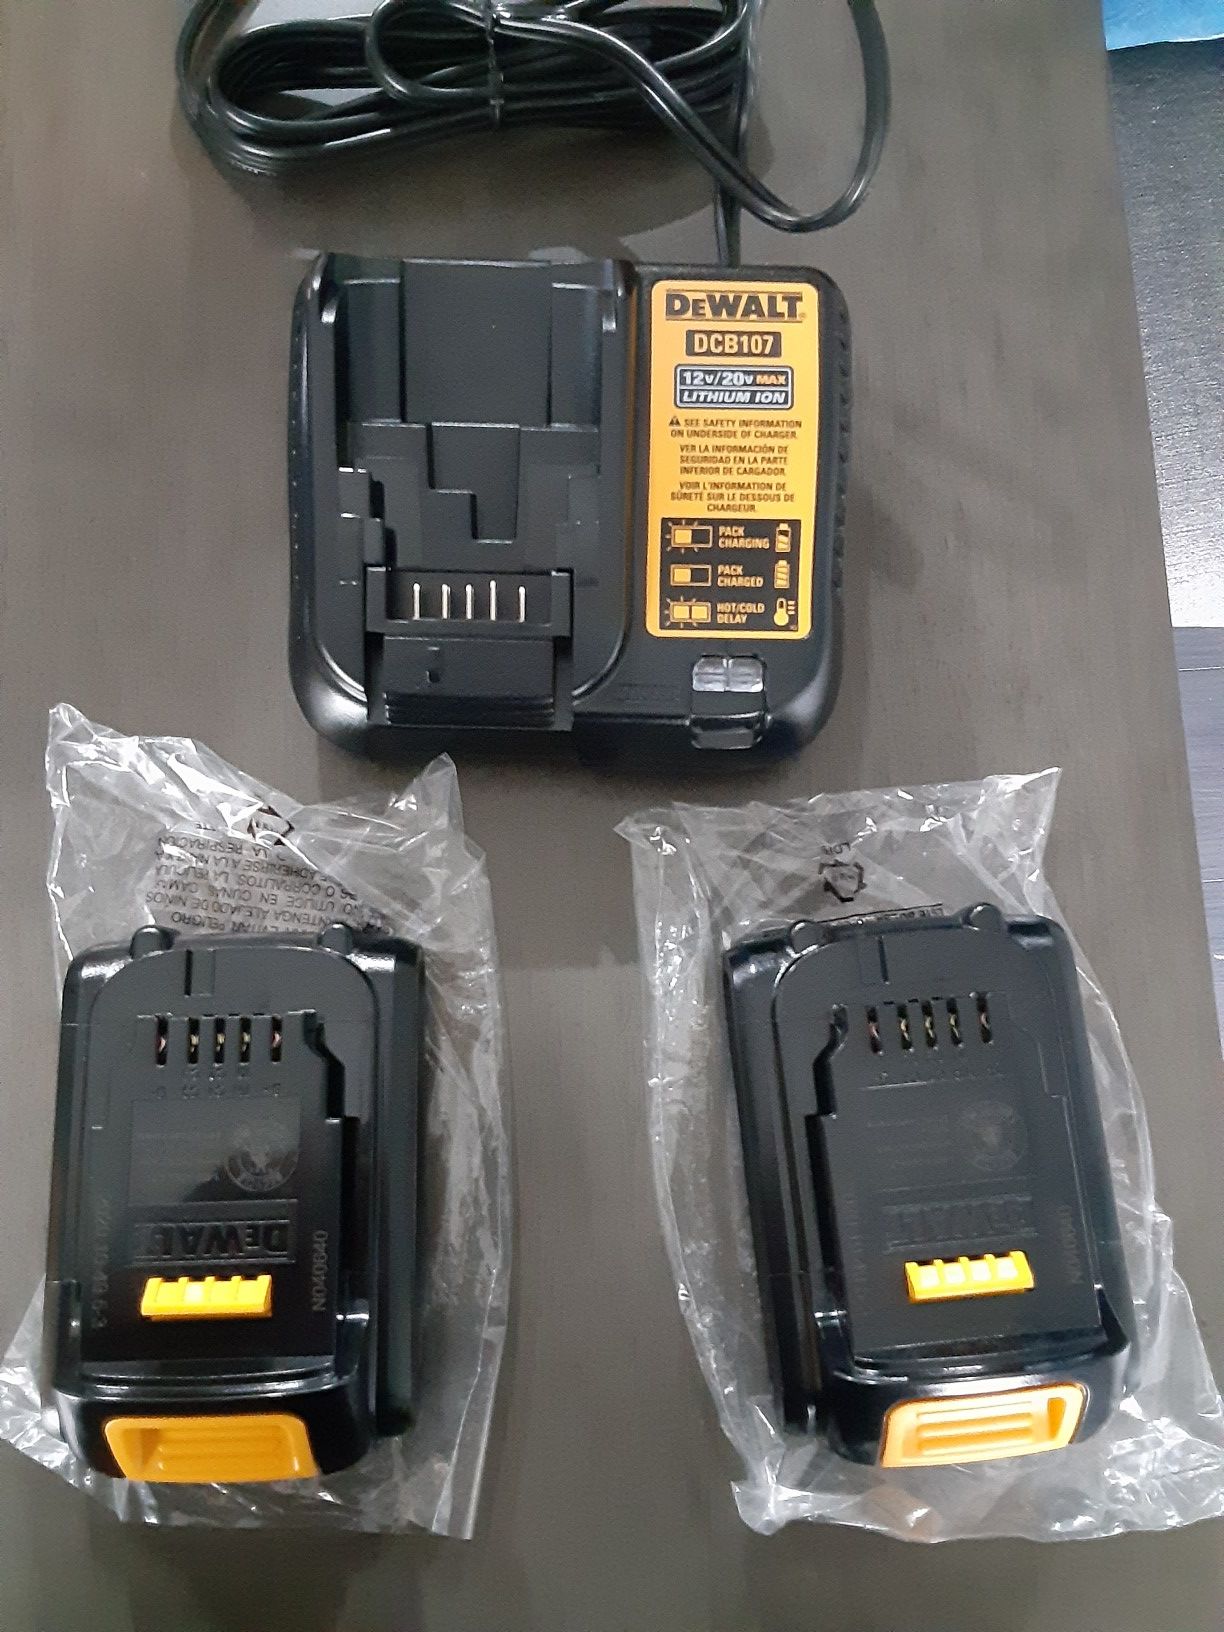 Dewalt 2 bateries and charger. New